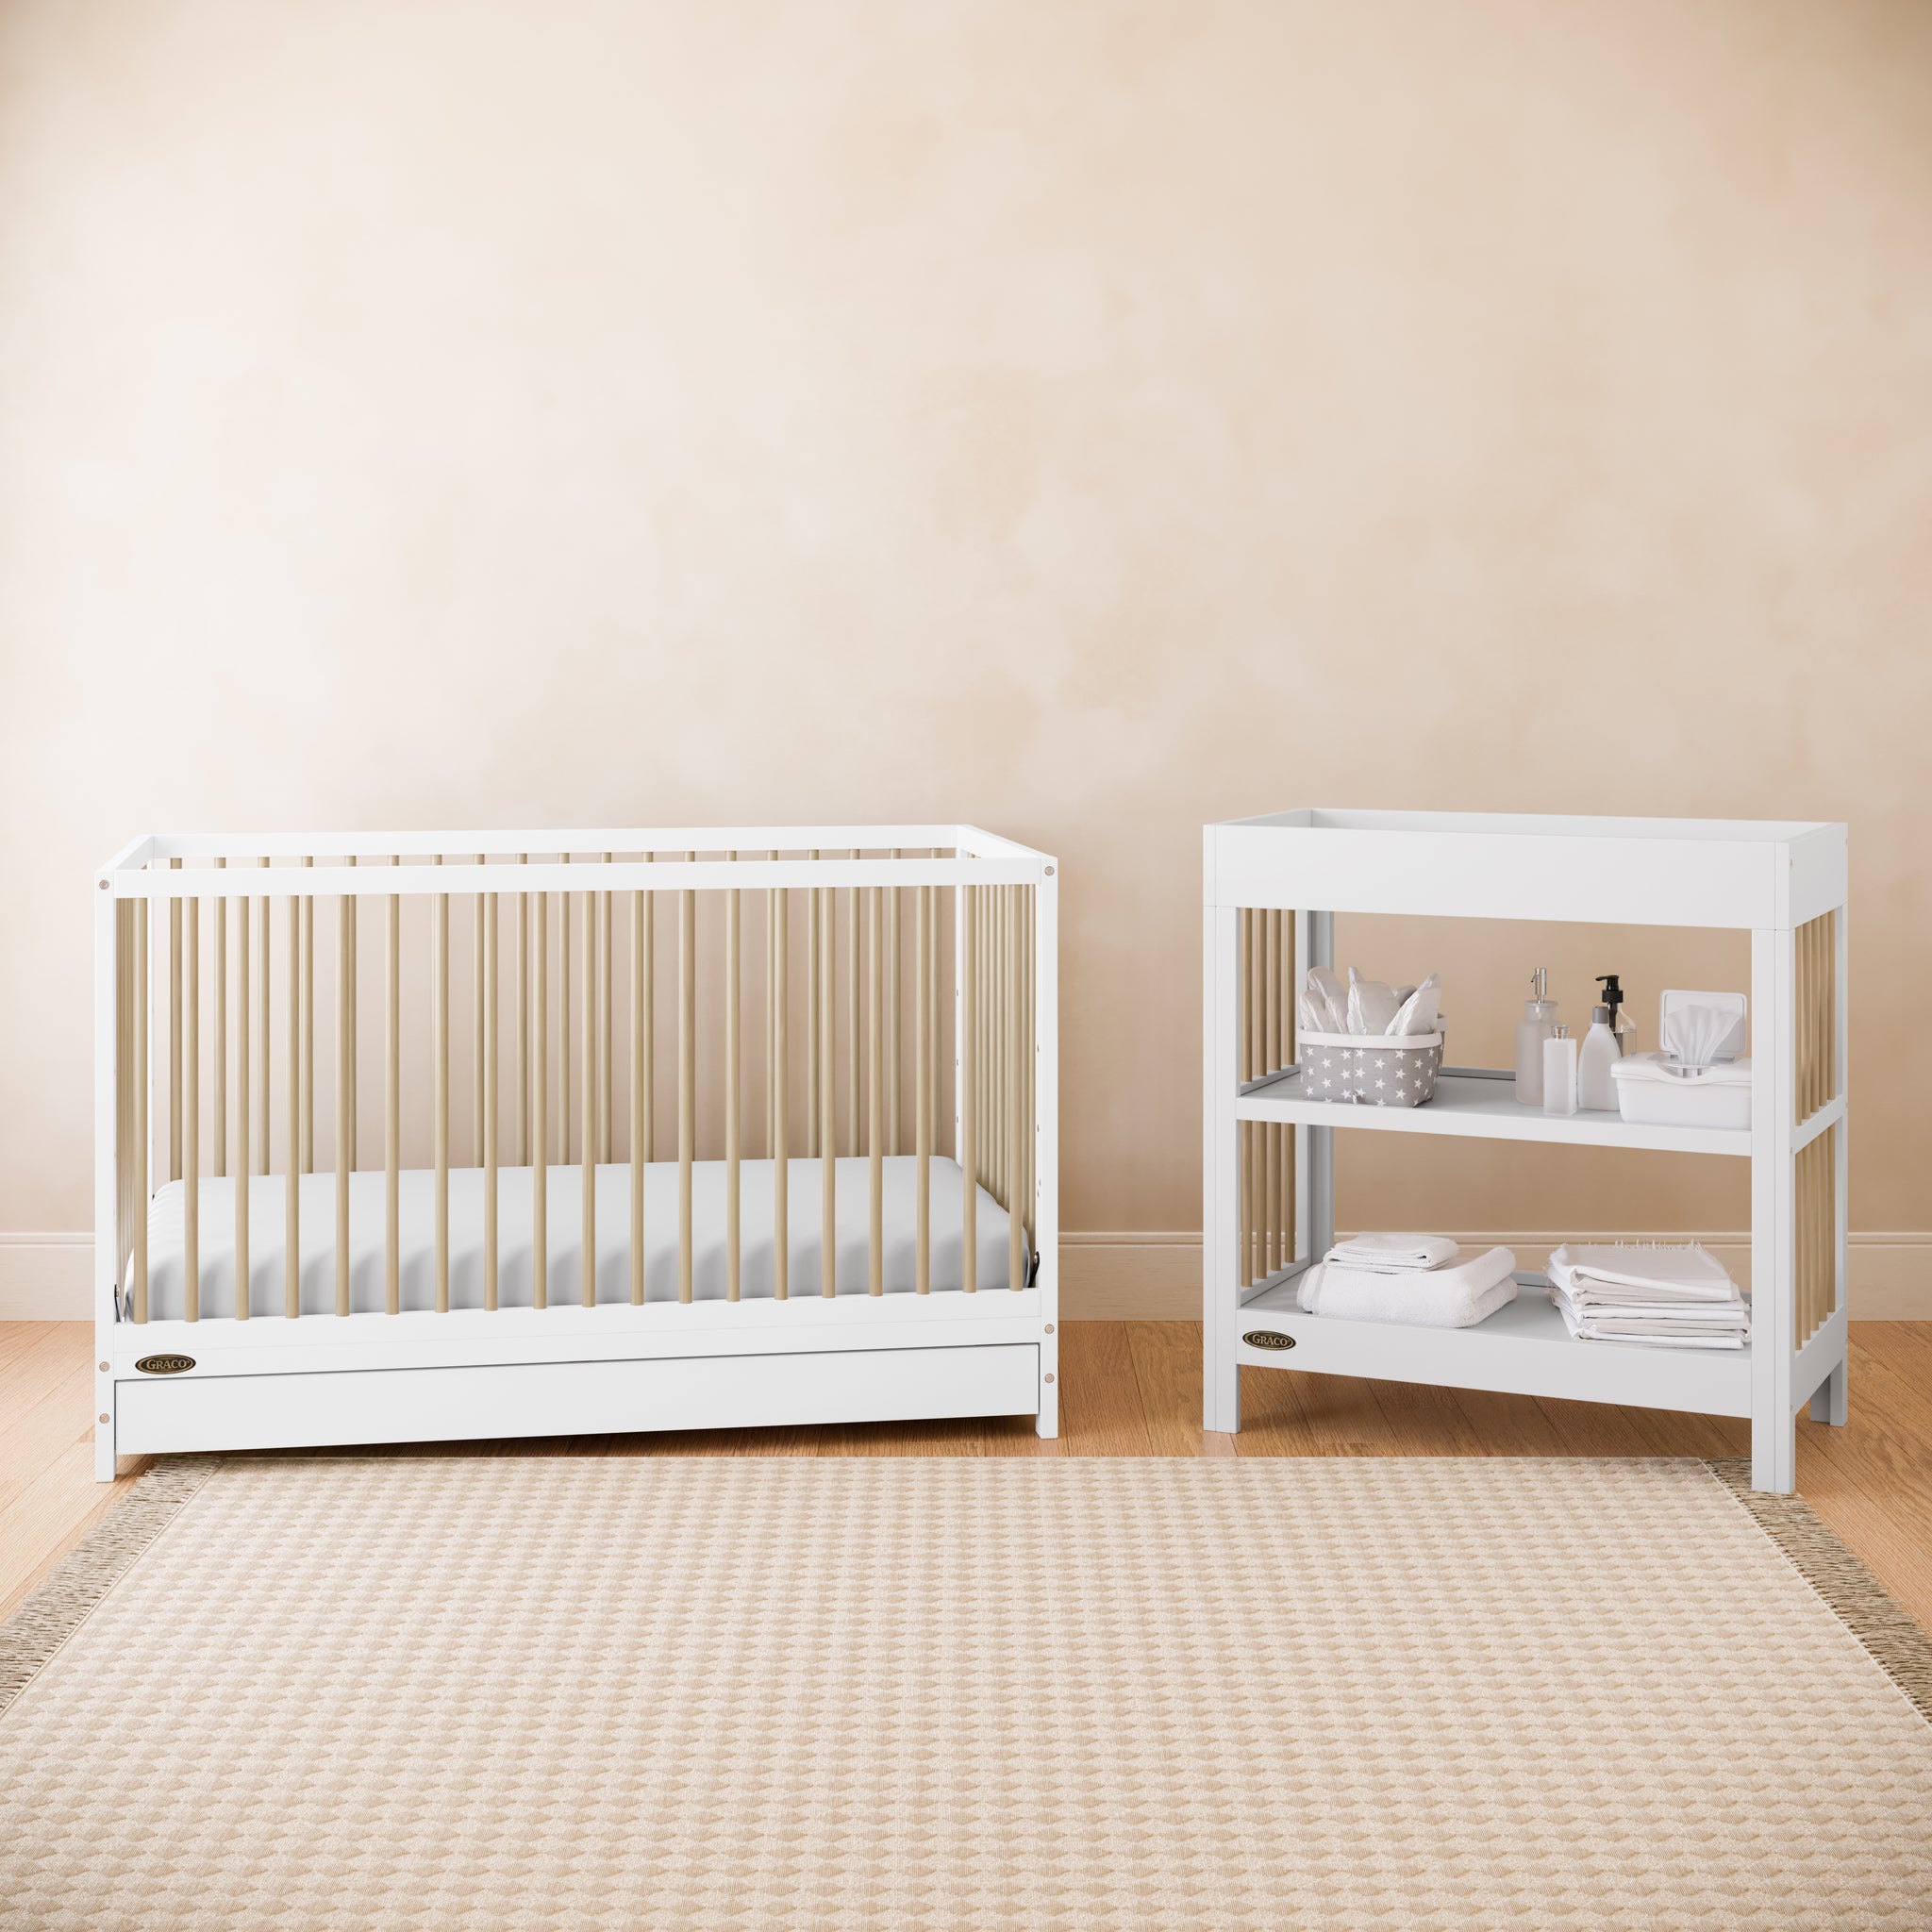 Two-tone white with light wood baby crib and changing table in nursery bedroom setting with rug in front of both items